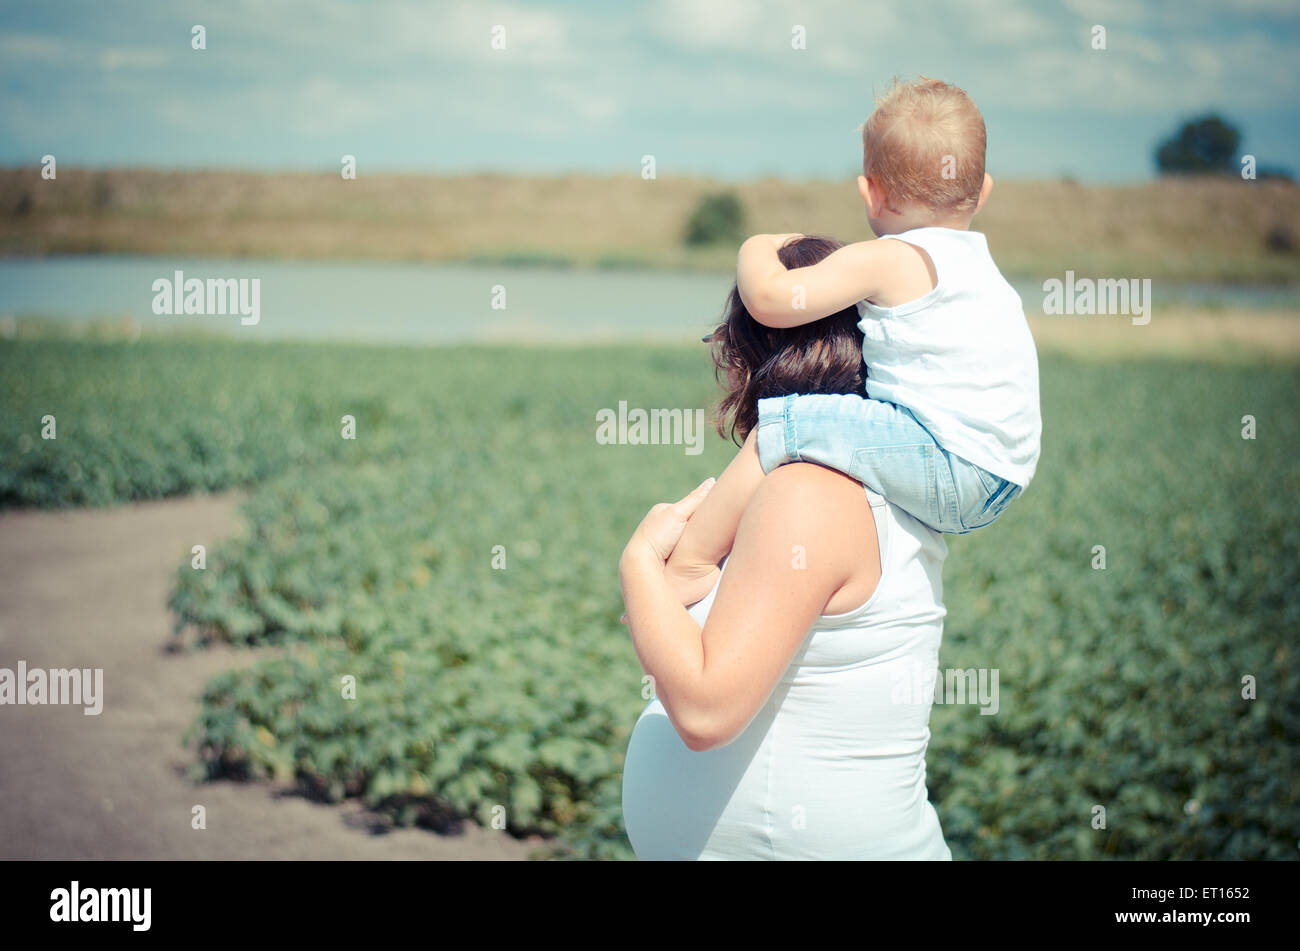 pregnant woman with boy on her neck Stock Photo